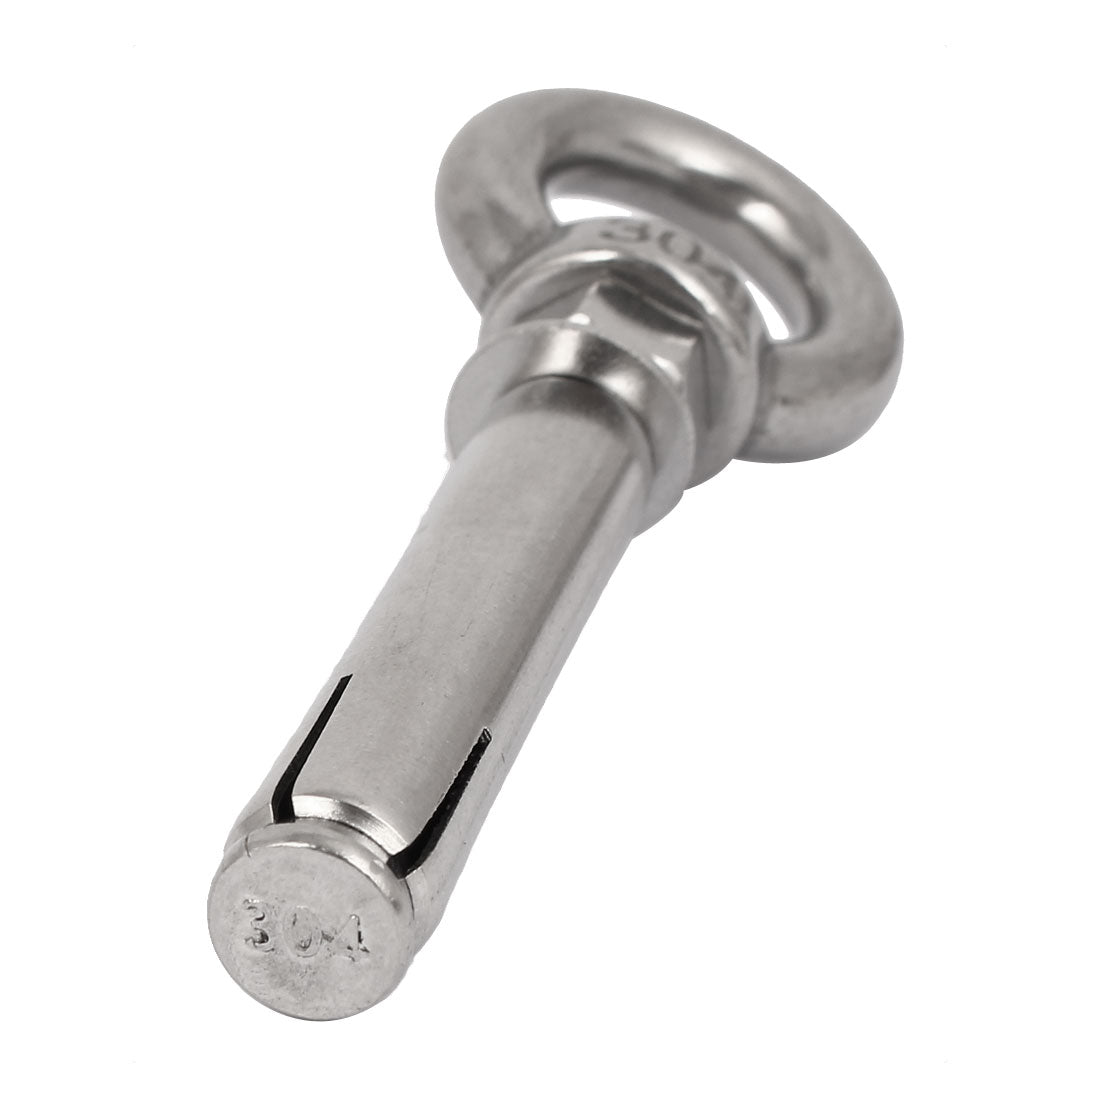 Uxcell Uxcell M8x80mm Wall 304 Stainless Steel Expansion Screws Closed Hook Shield Bolts 2pcs